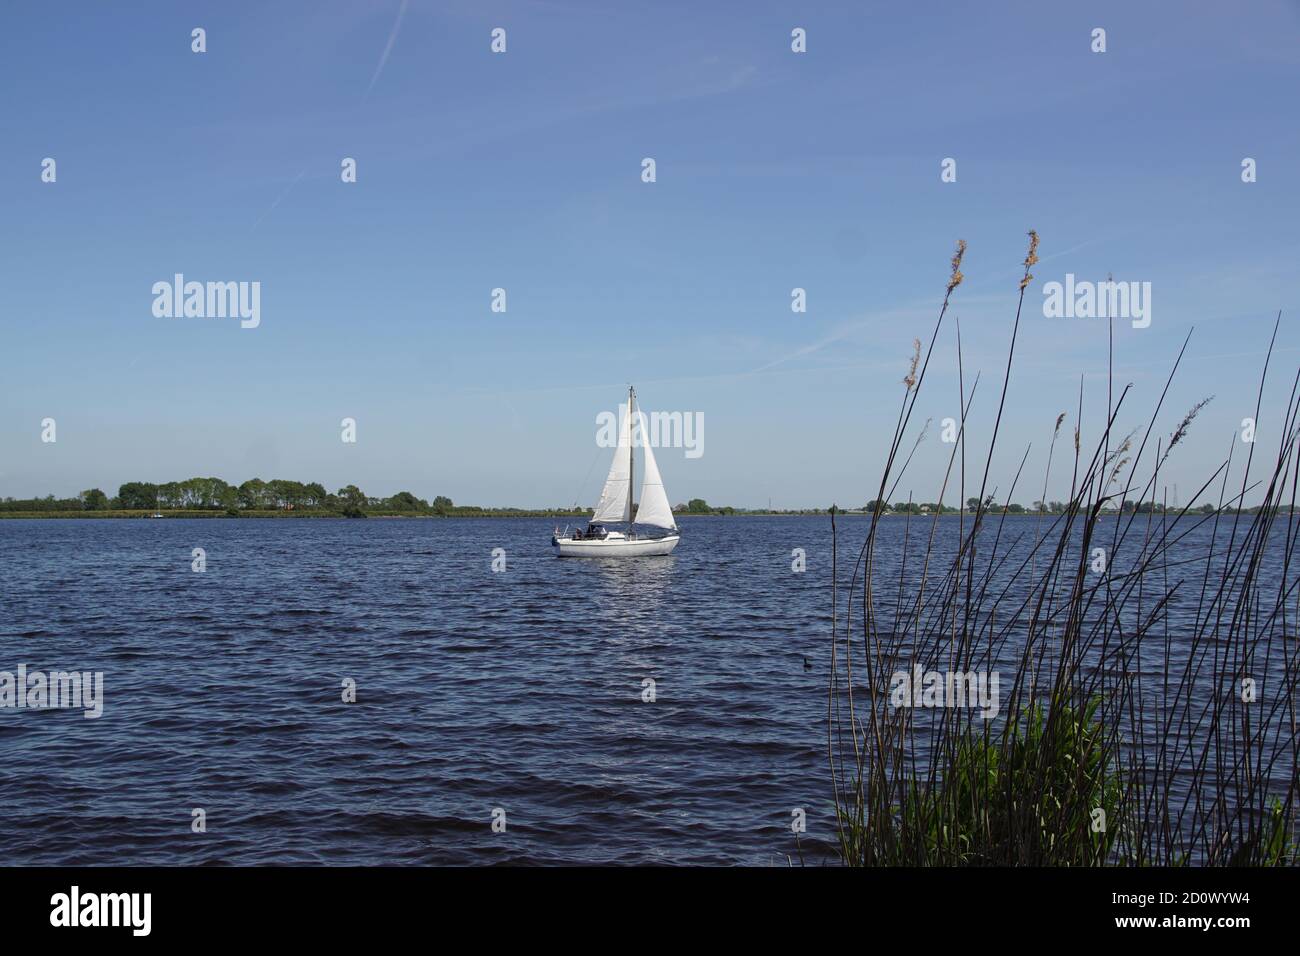 View on the Alkmaardermeer lake with a sailing ship near the Dutch village of Akersloot. Netherlands, May Stock Photo